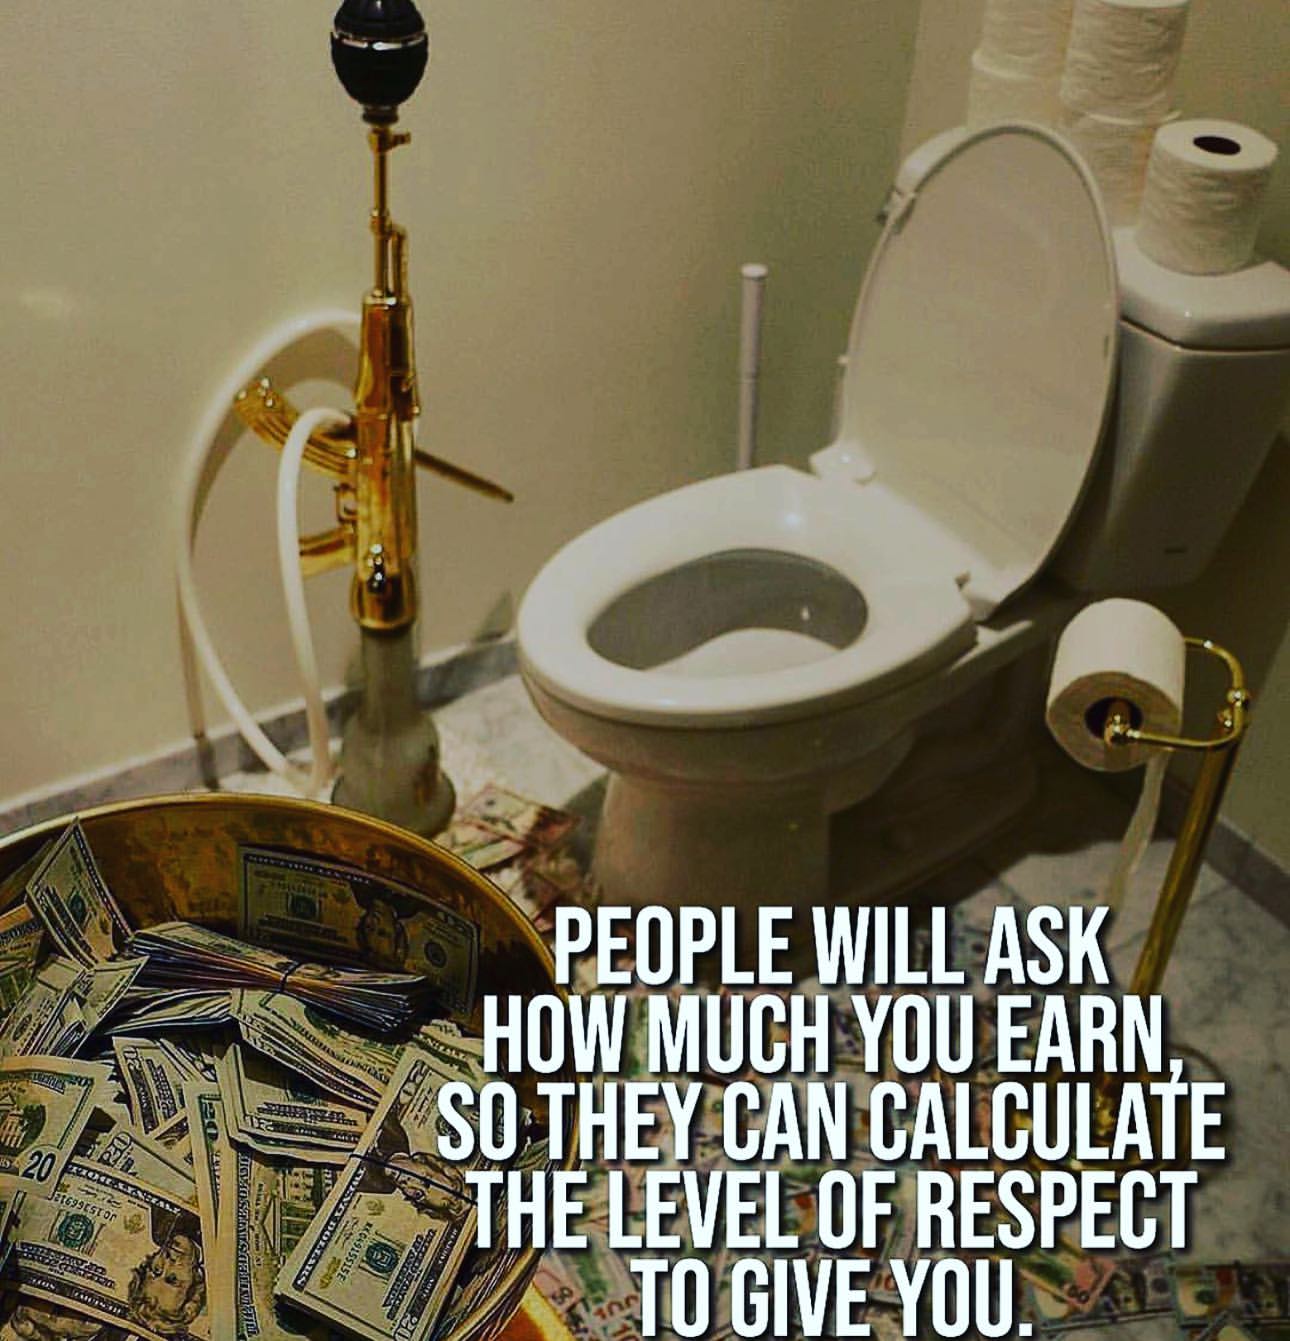 People will ask how much you earn, so they can calculate the level of respect to give you.